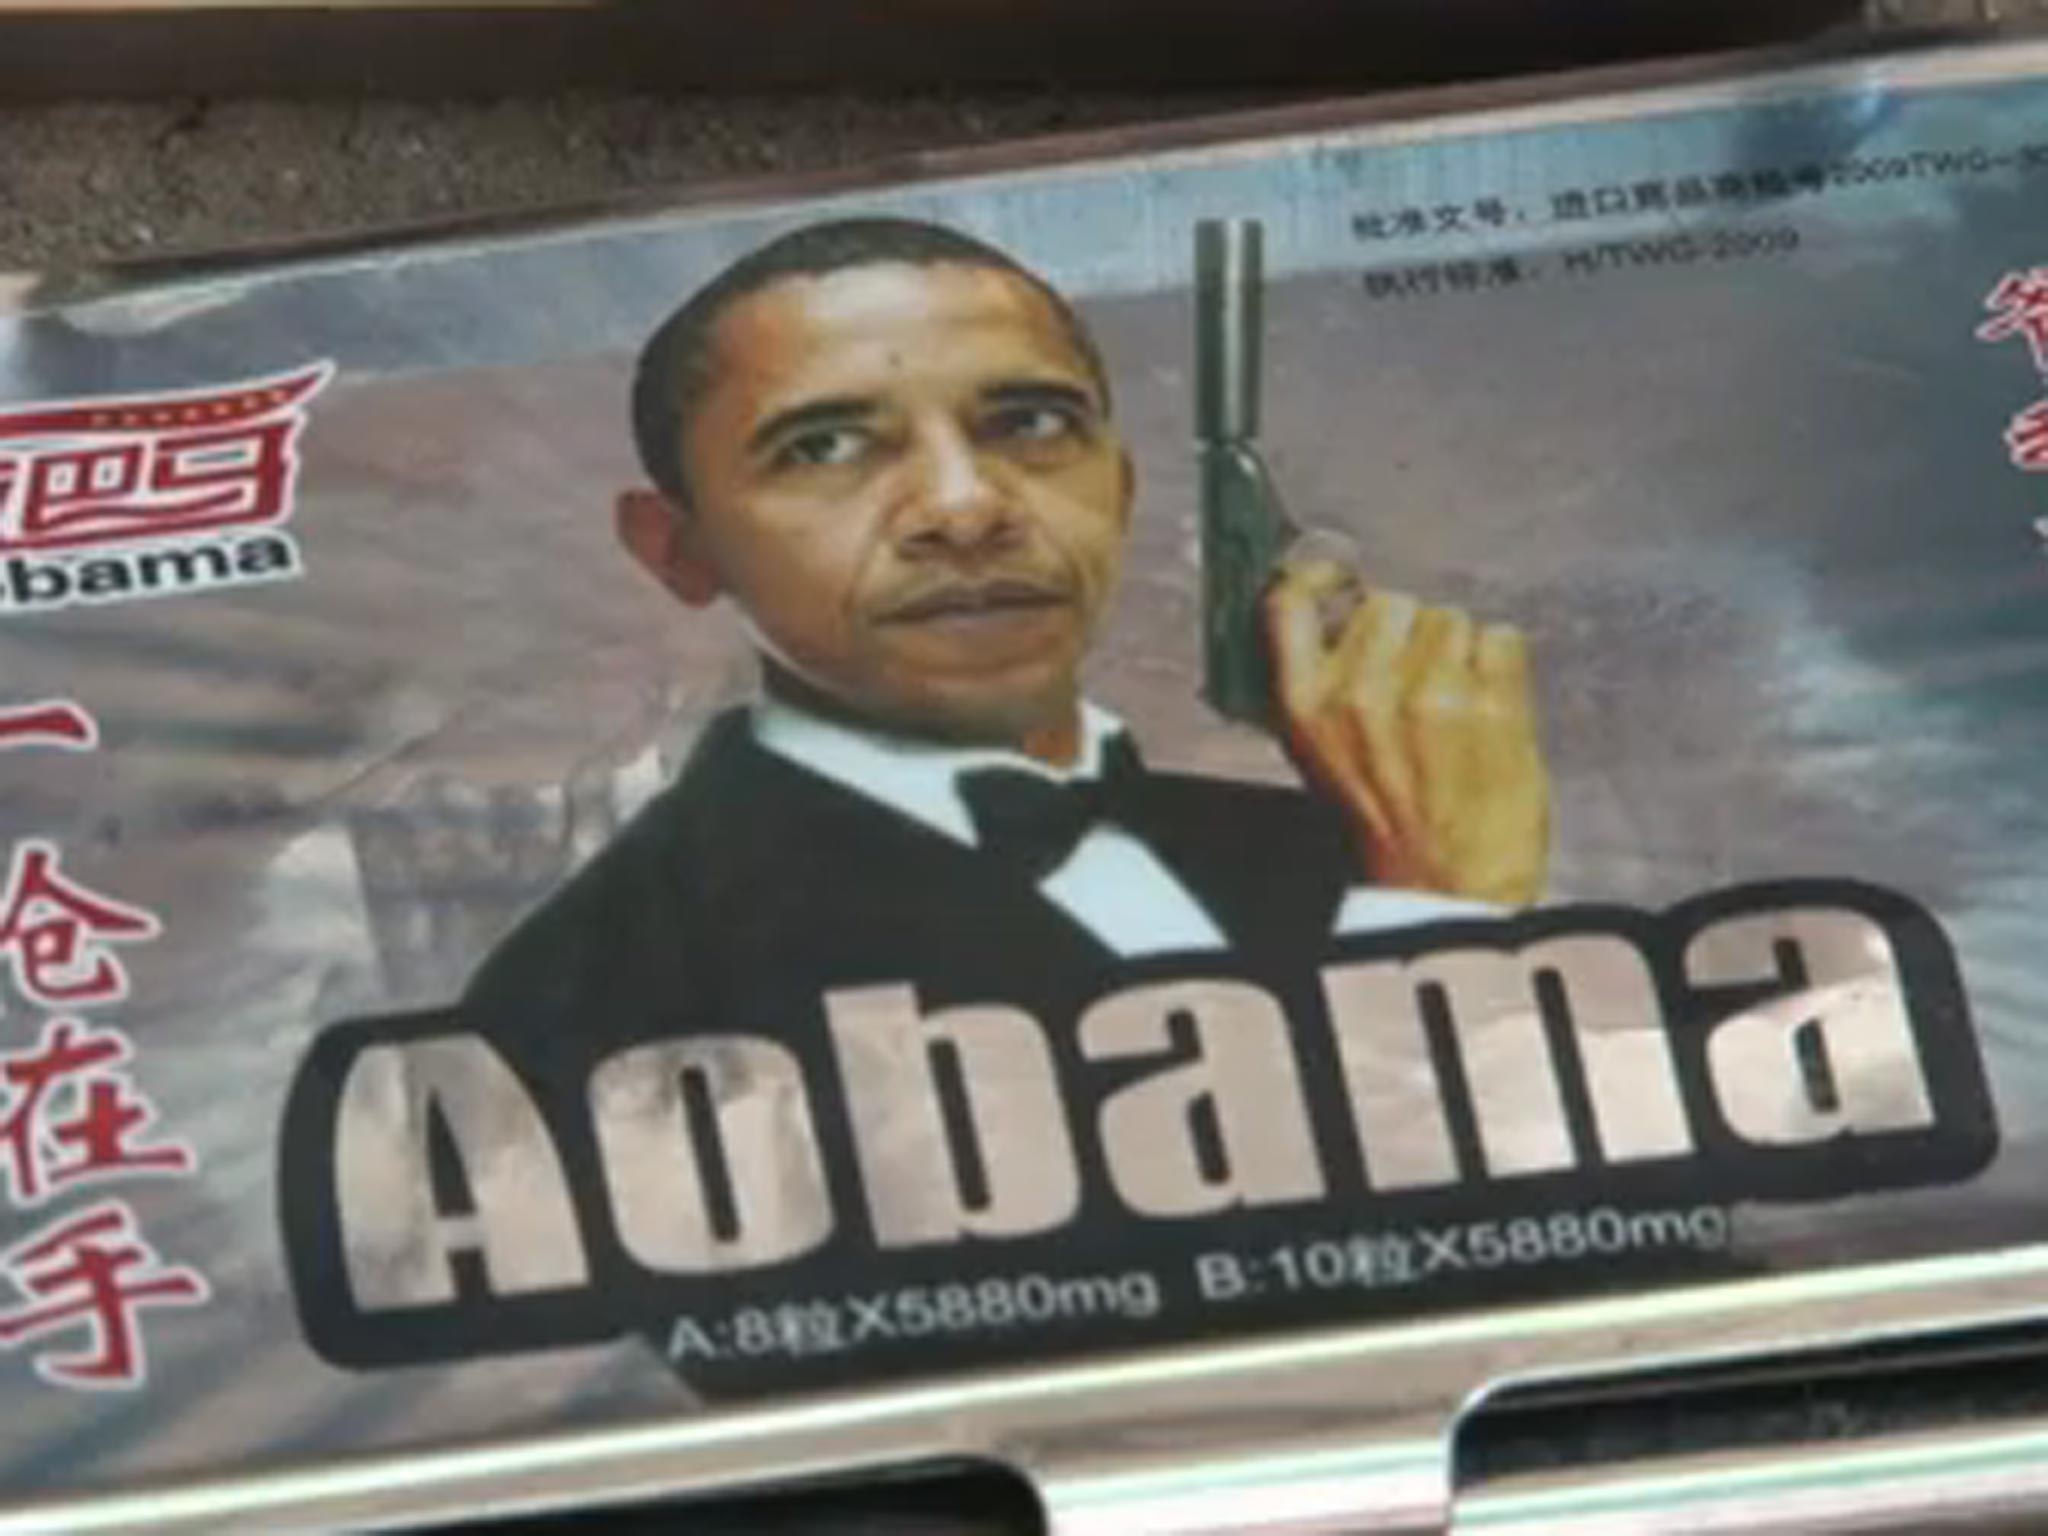 Obama has become the unwitting face of contraband Viagra